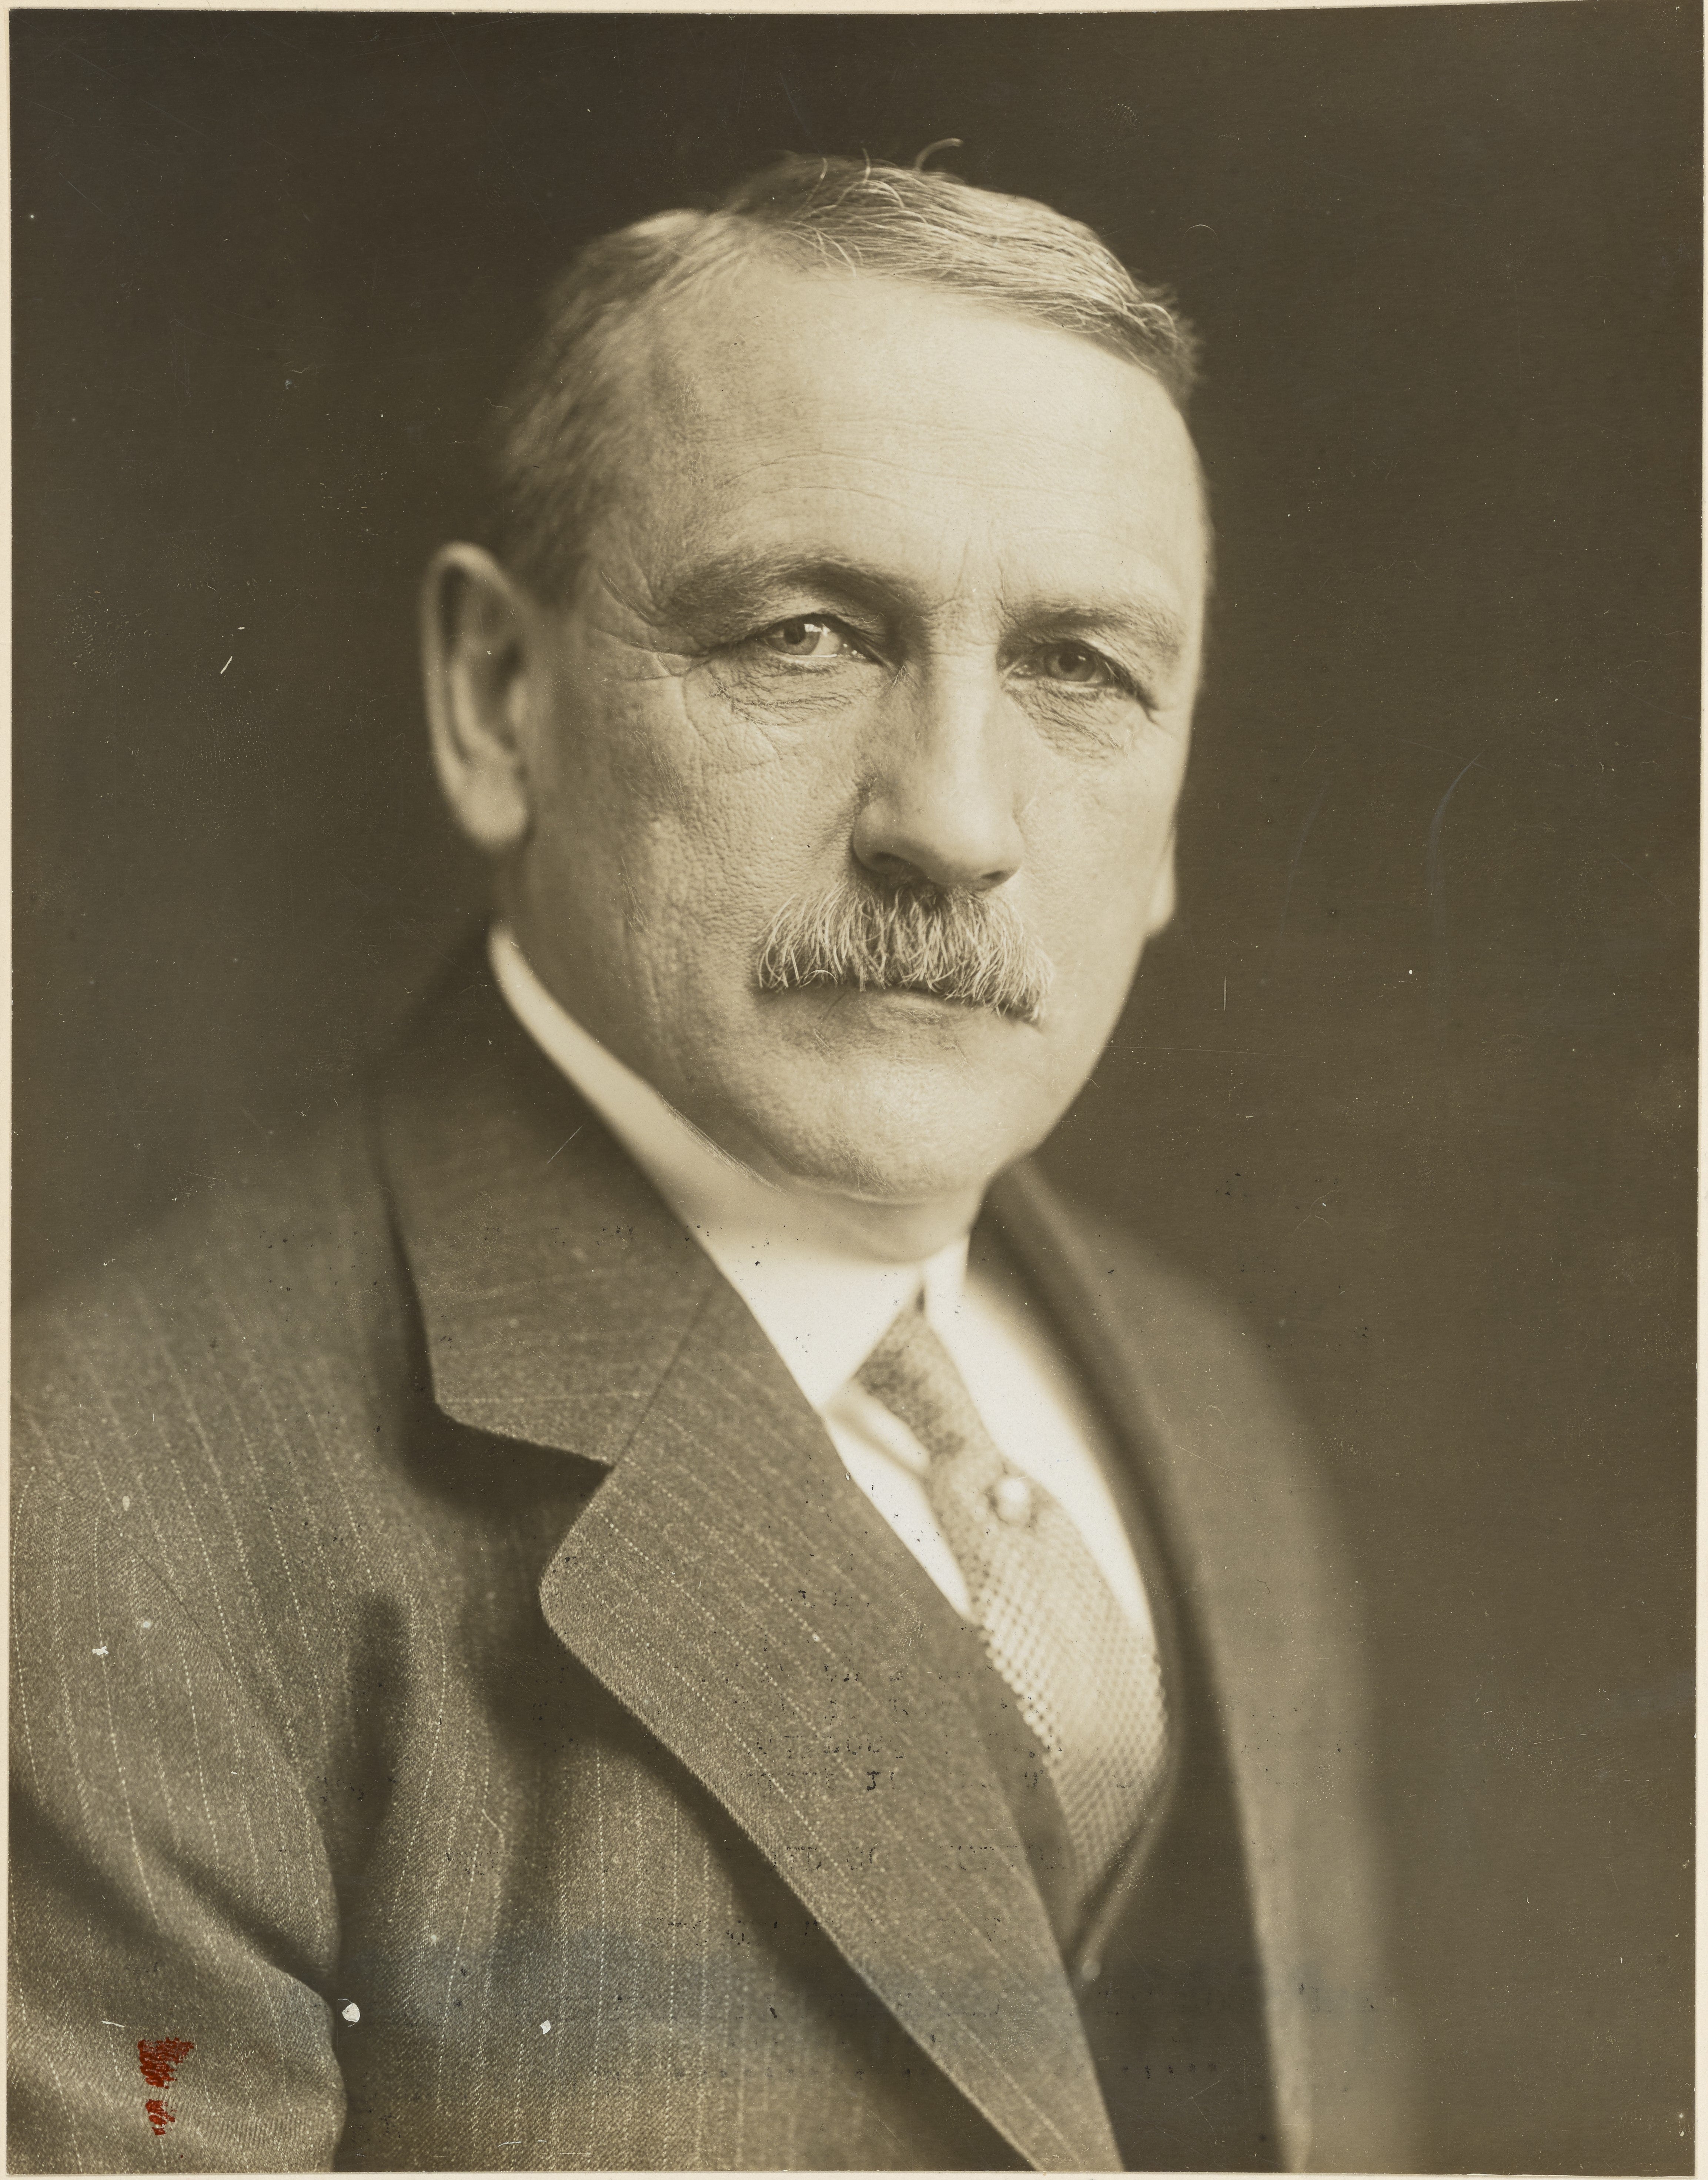 John F. Stevens arrives at the Canal, replacing Wallace as Chief Engineer. Stevens all but stops excavation and rebuilds the railroad, builds infrastructure and housing, and improves living conditions.